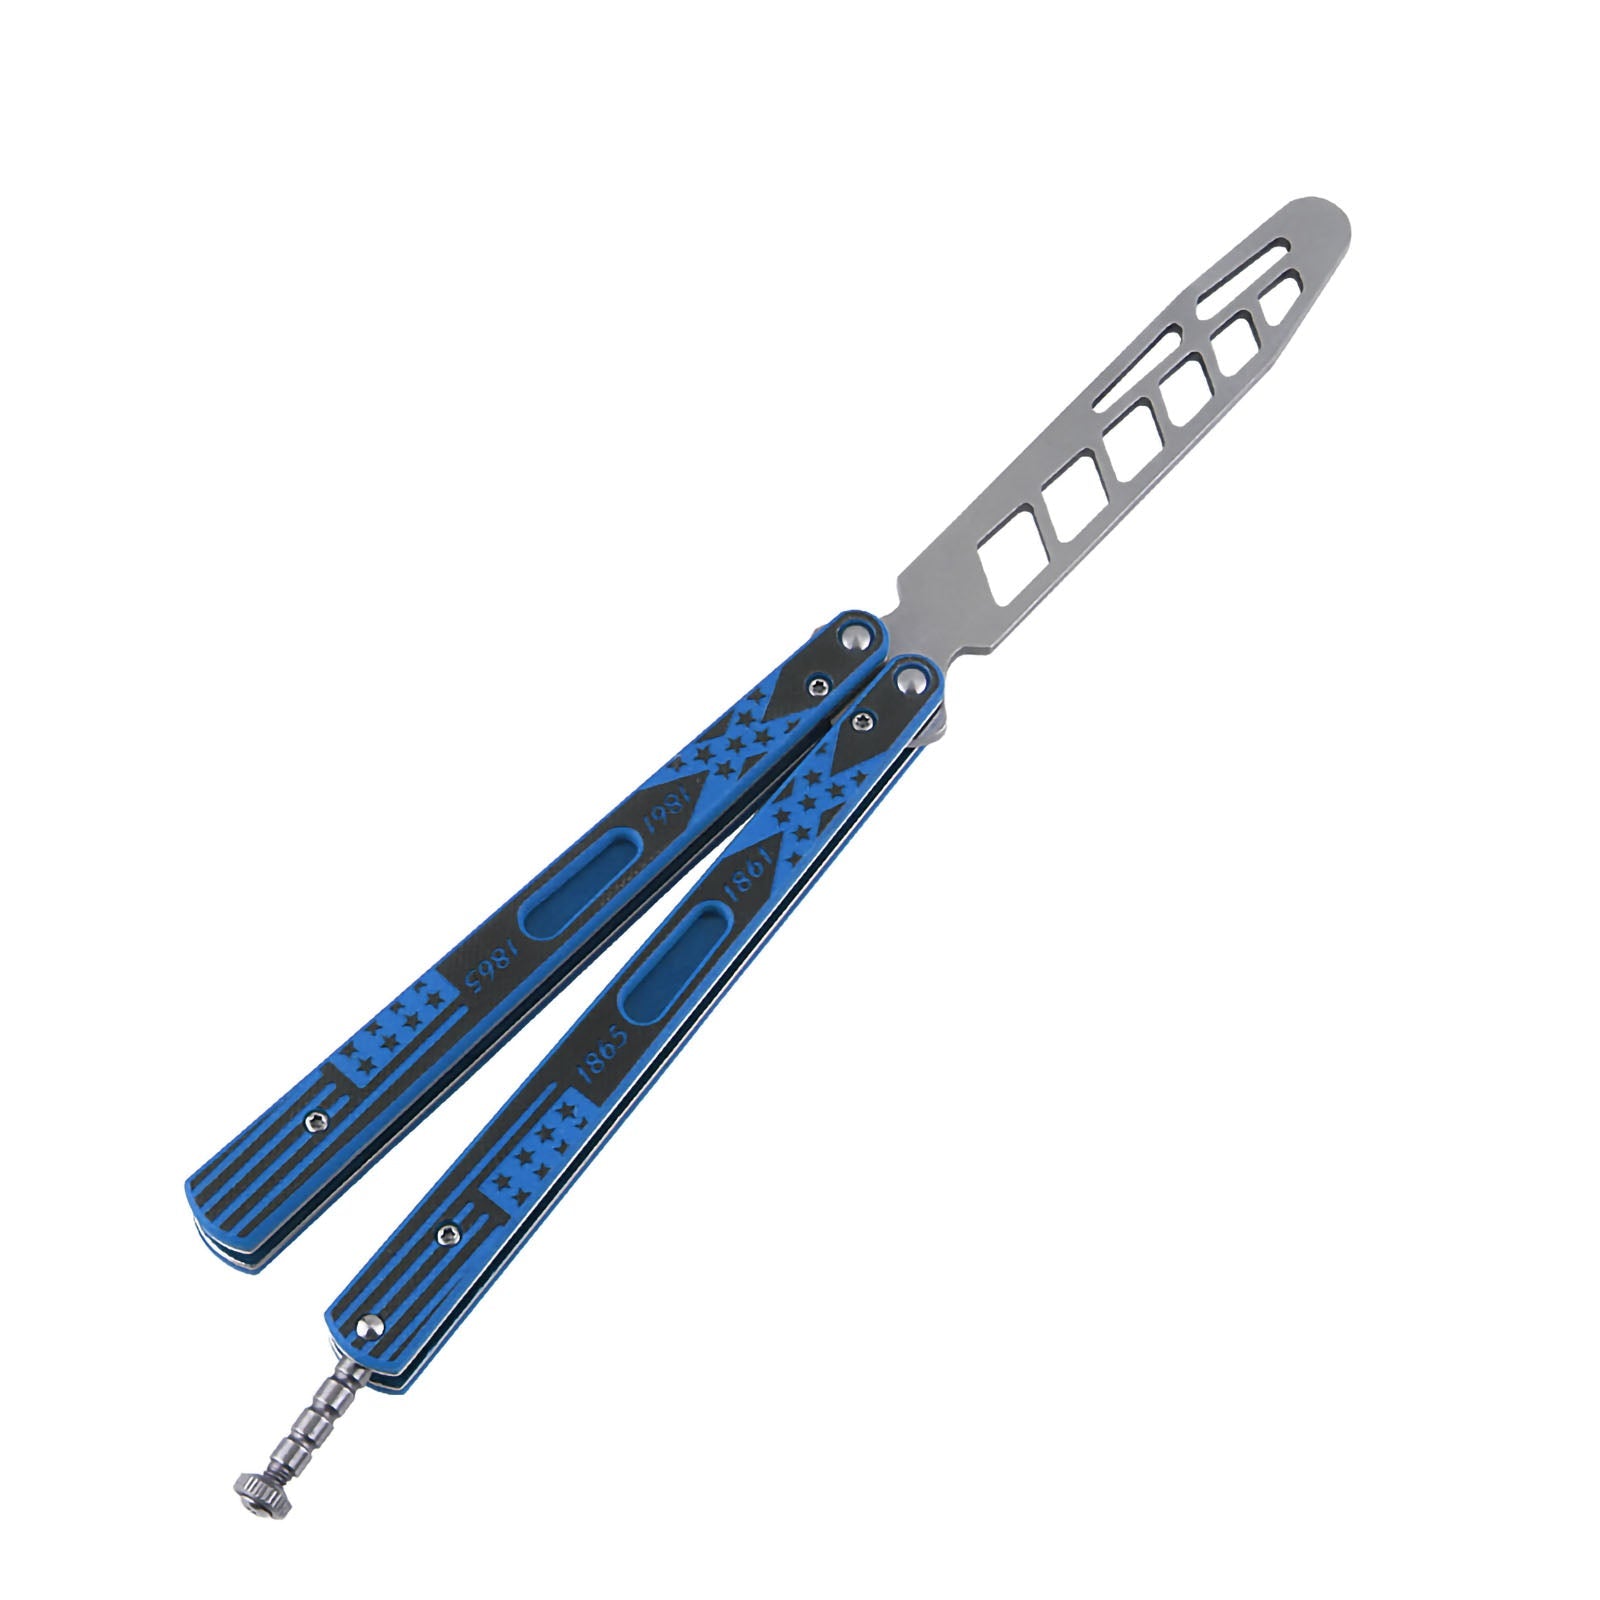 Andux Balisong CS:GO Equipment Blue CS/HDD44 (ONLY Available in the United States)